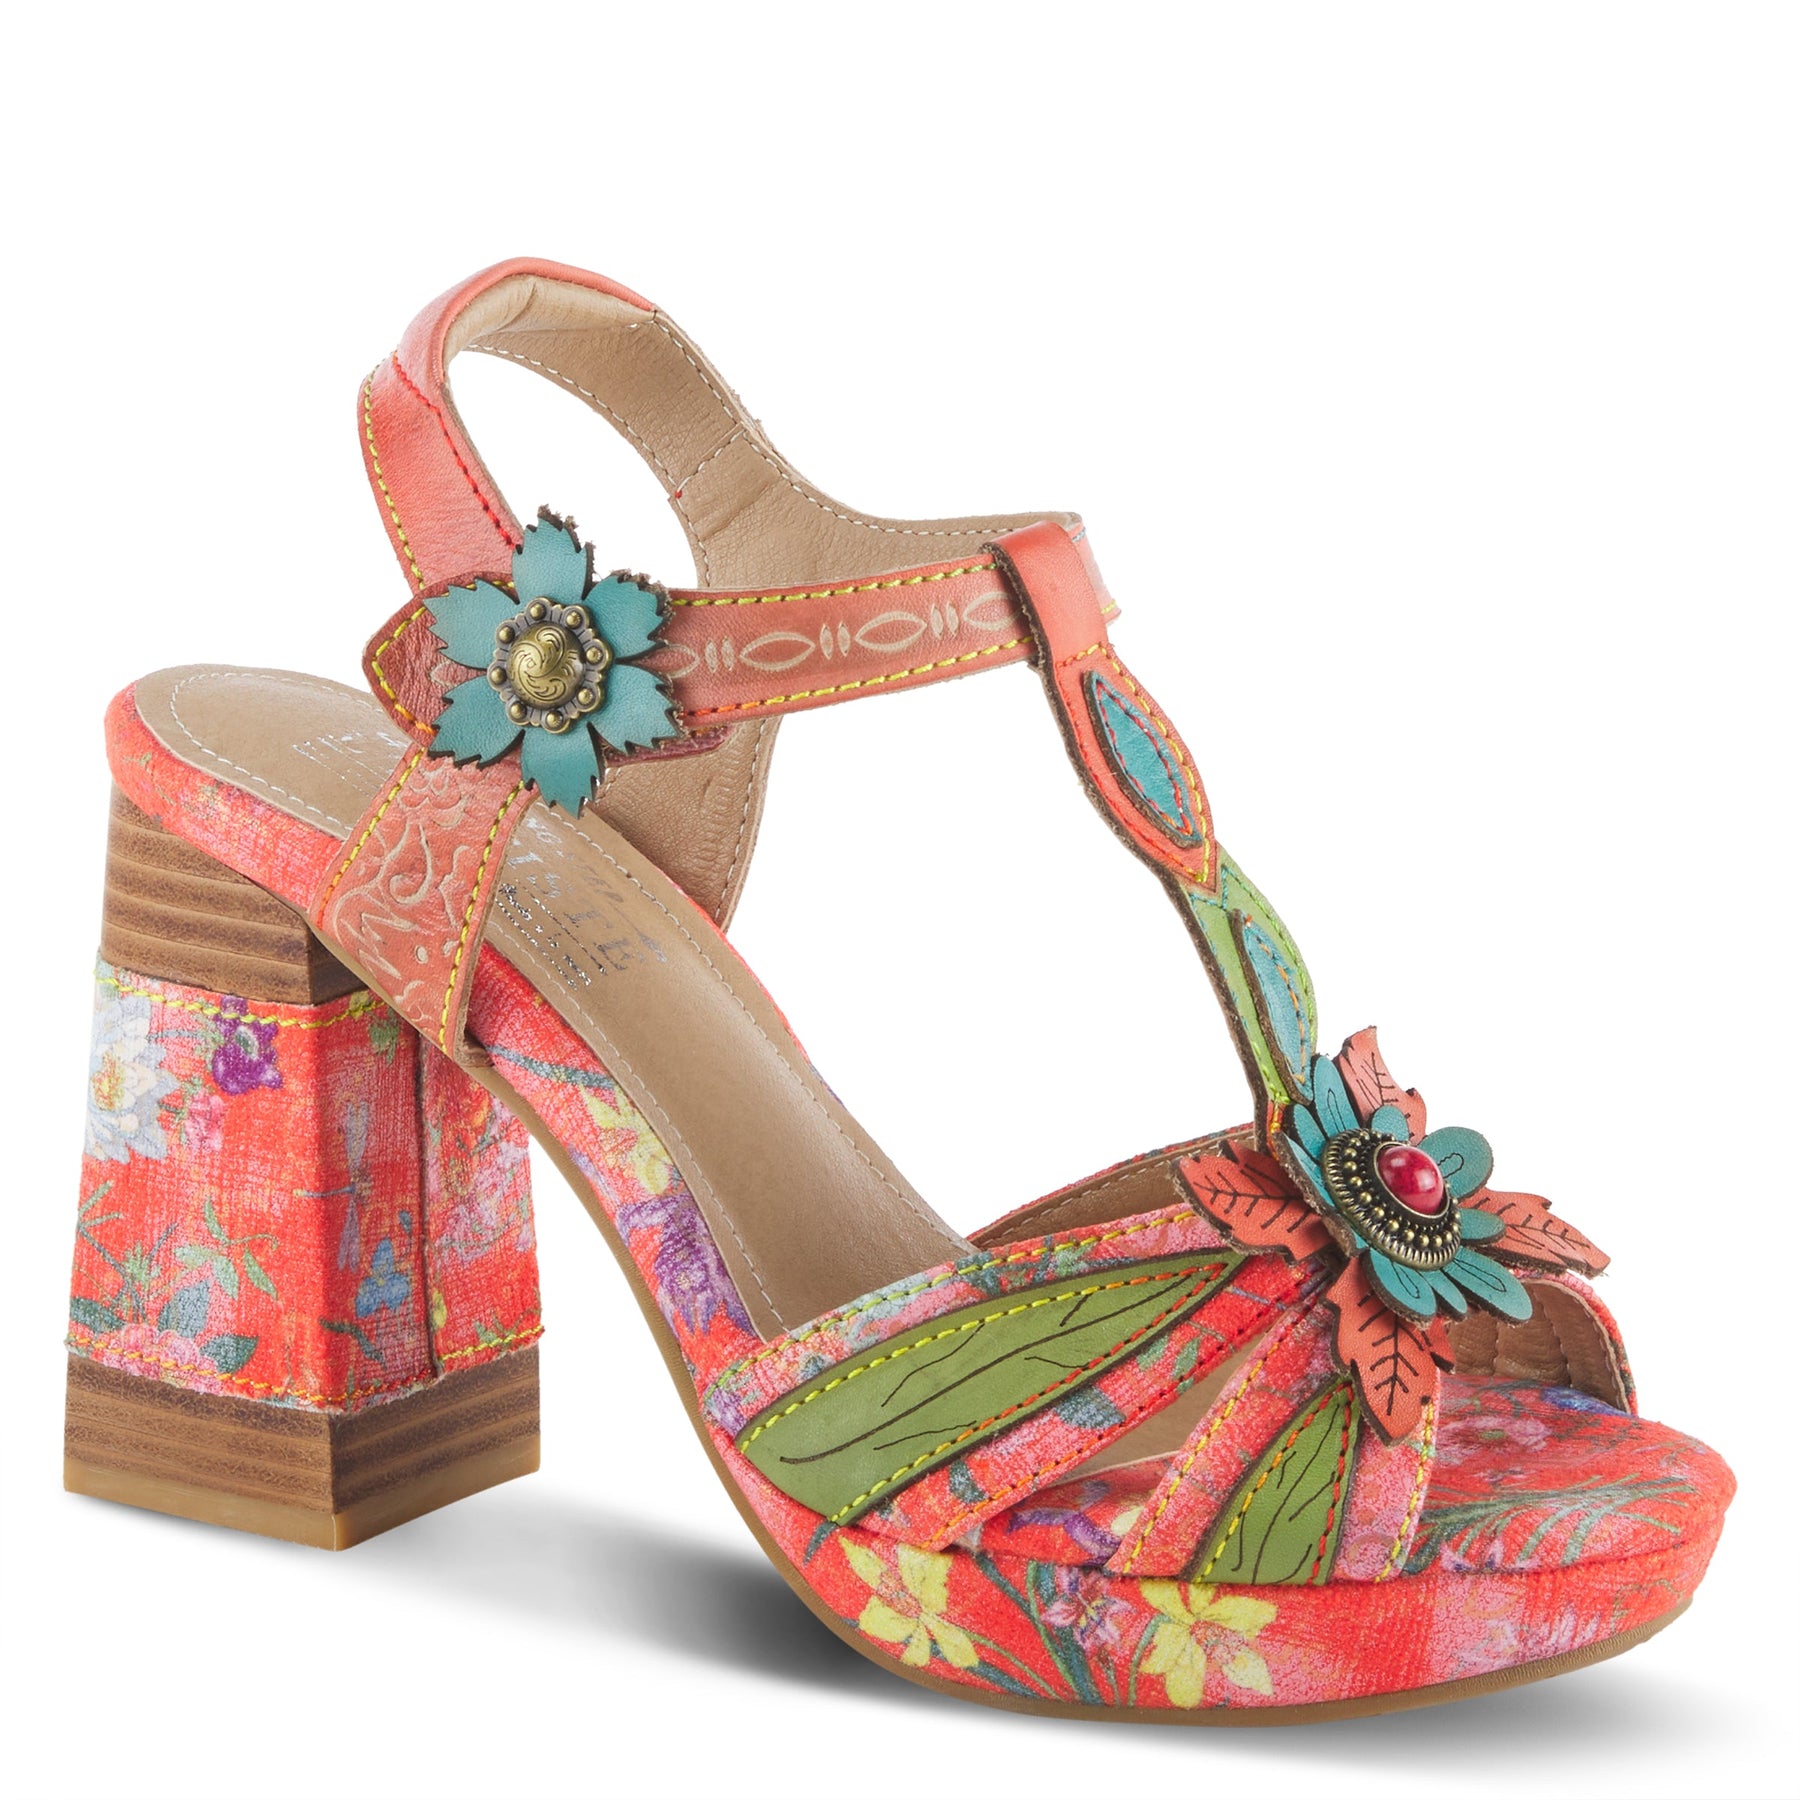 L'ARTISTE FABULOSO SANDALS by L'ARTISTE – Spring Step Shoes